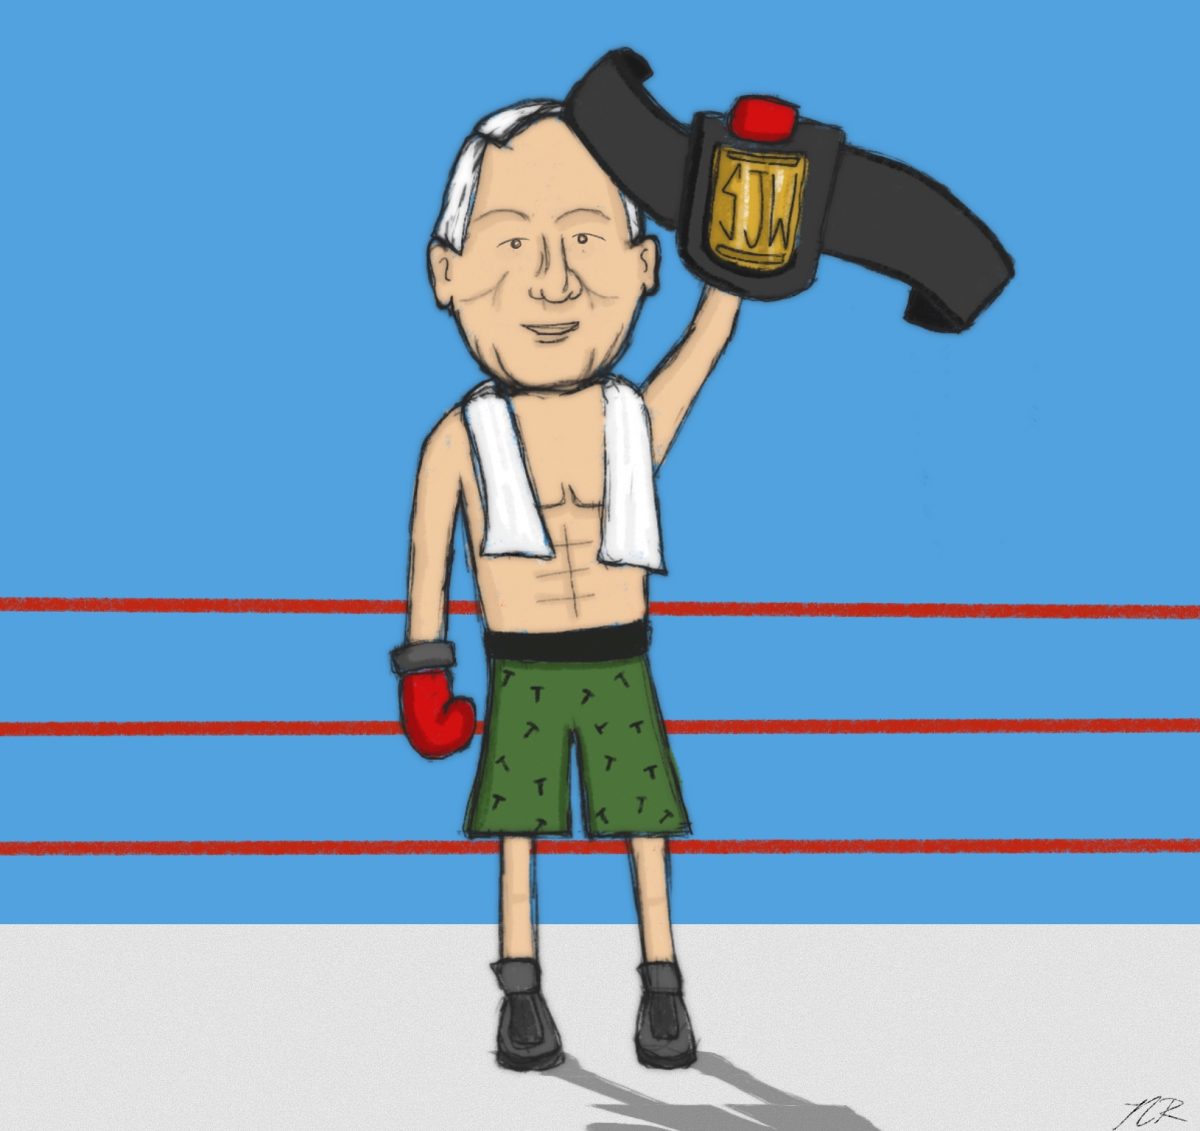 Walter Isaacson is ready to bring the heat into the ring